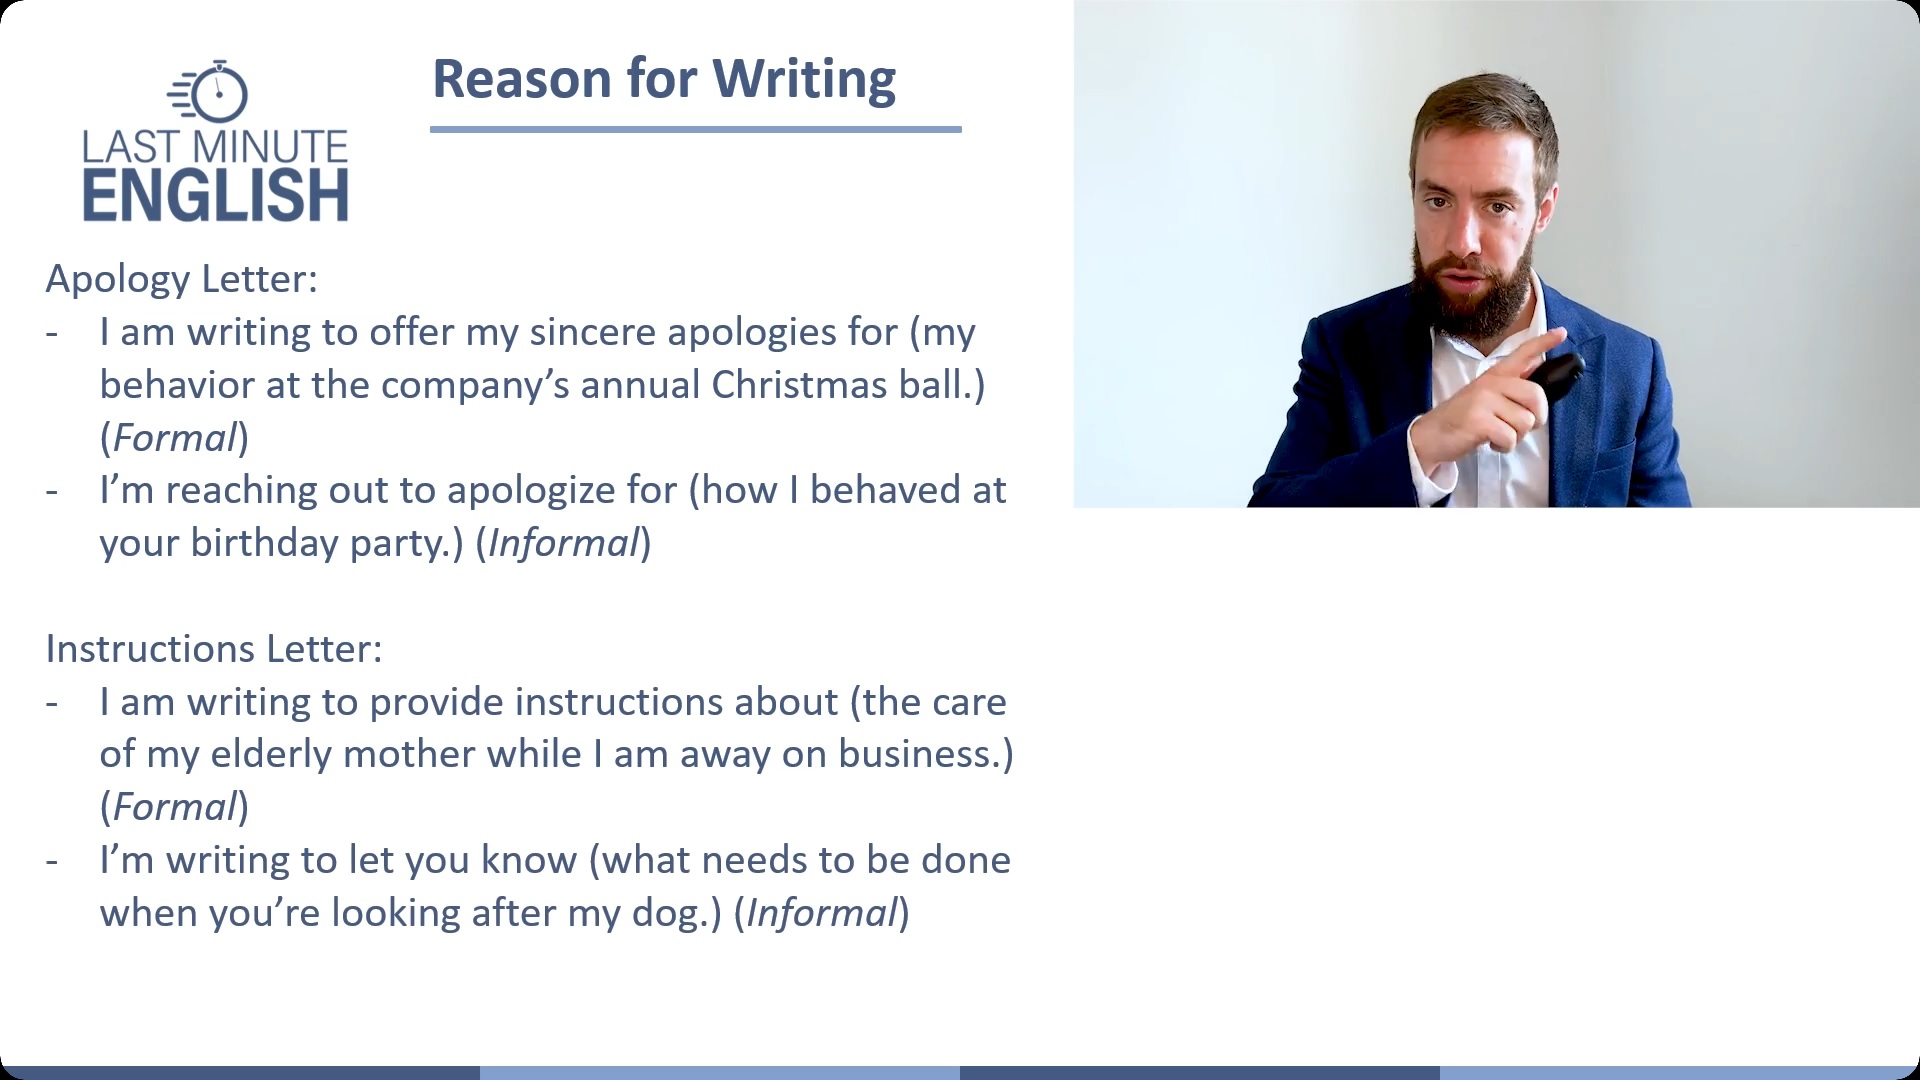 IELTS General Writing Task 1 - Reason for Writing Part 2